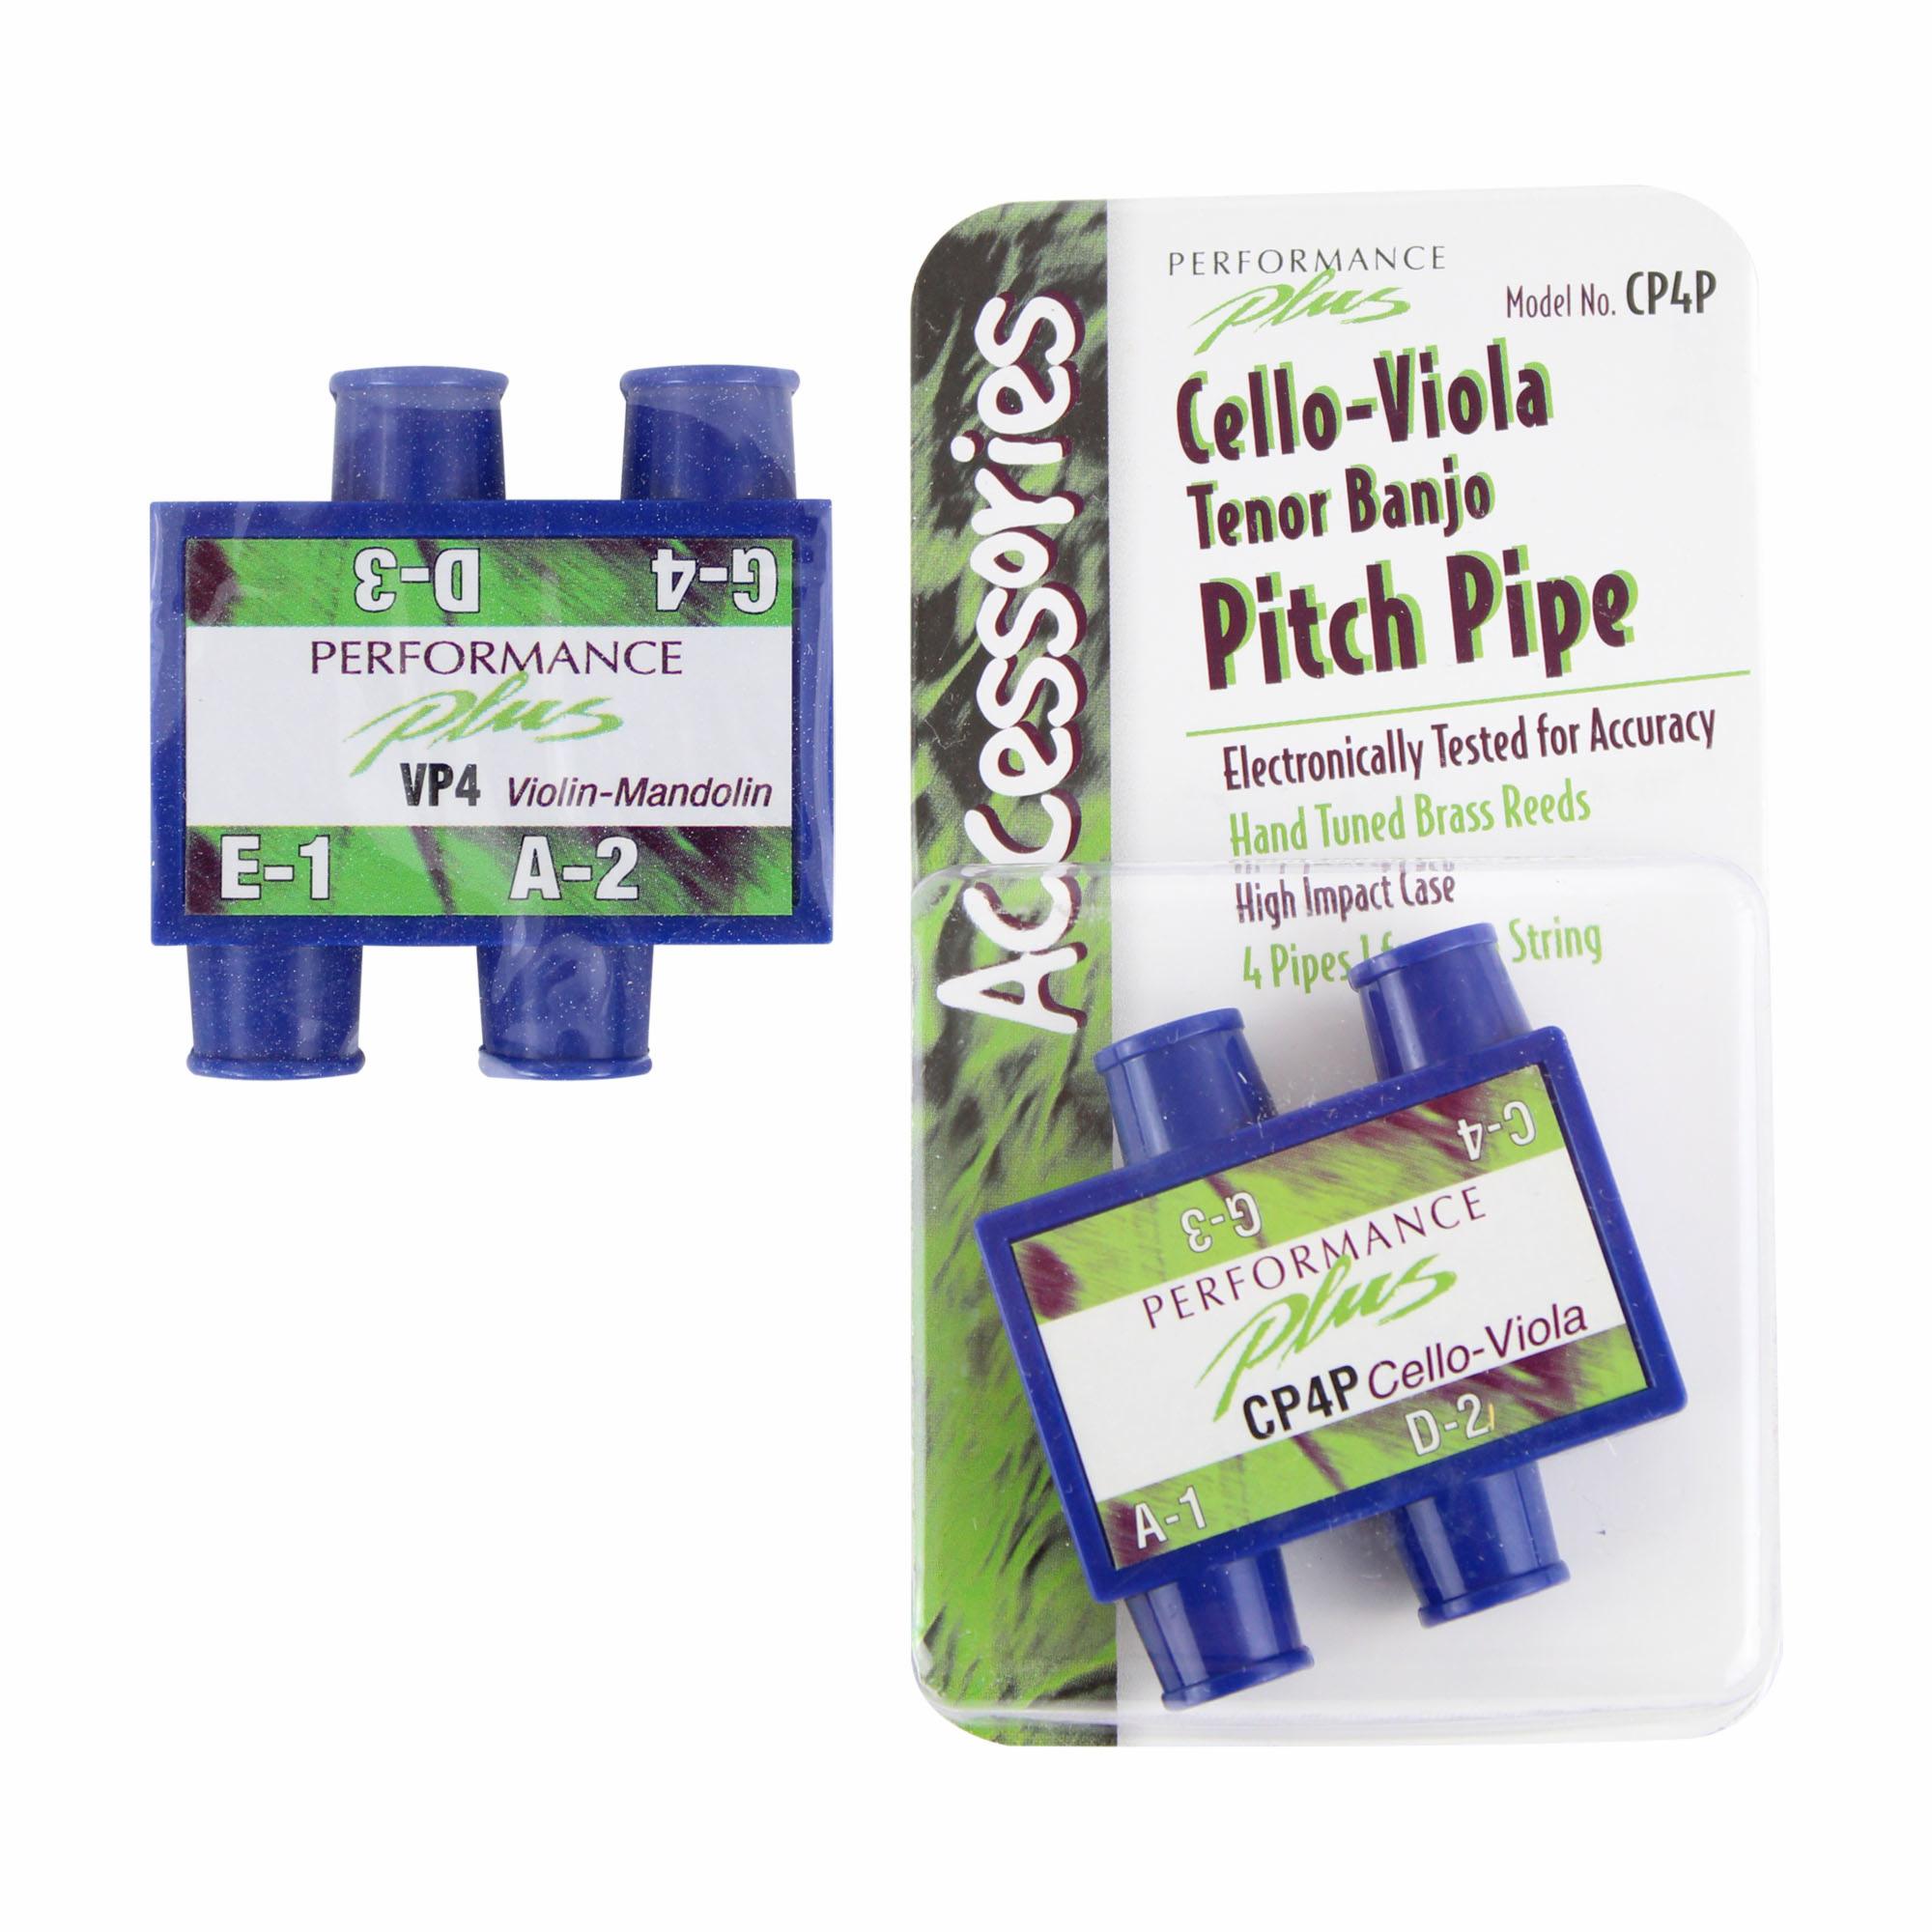 Performance Plus Pitchpipe